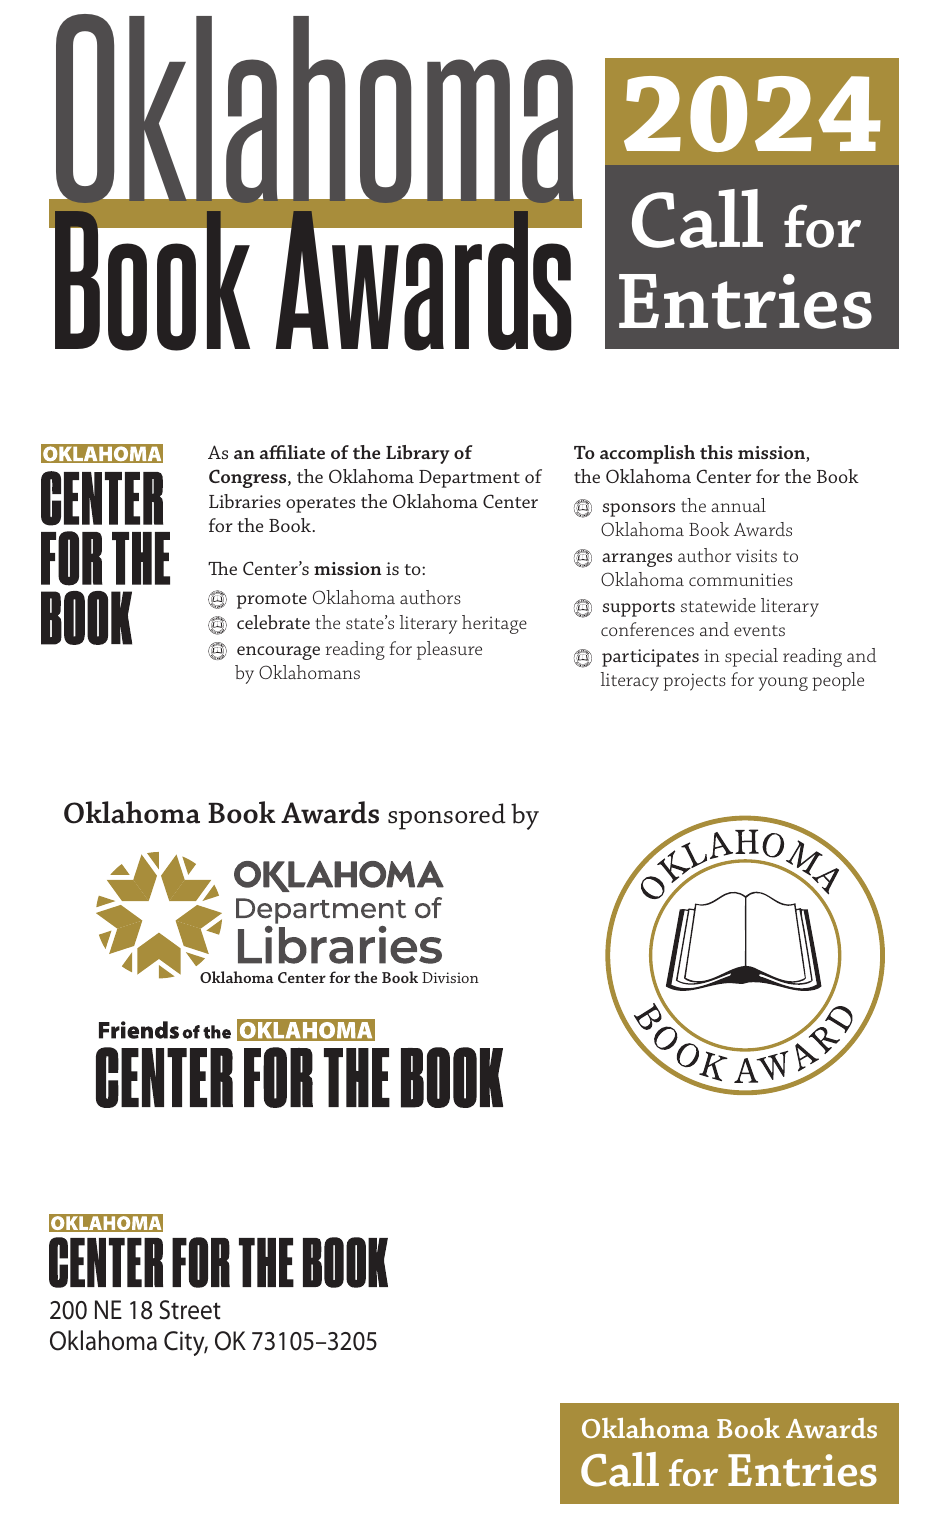 Thirty-Fifth Annual Oklahoma Book Awards Call for Entries - Oklahoma, Page 1